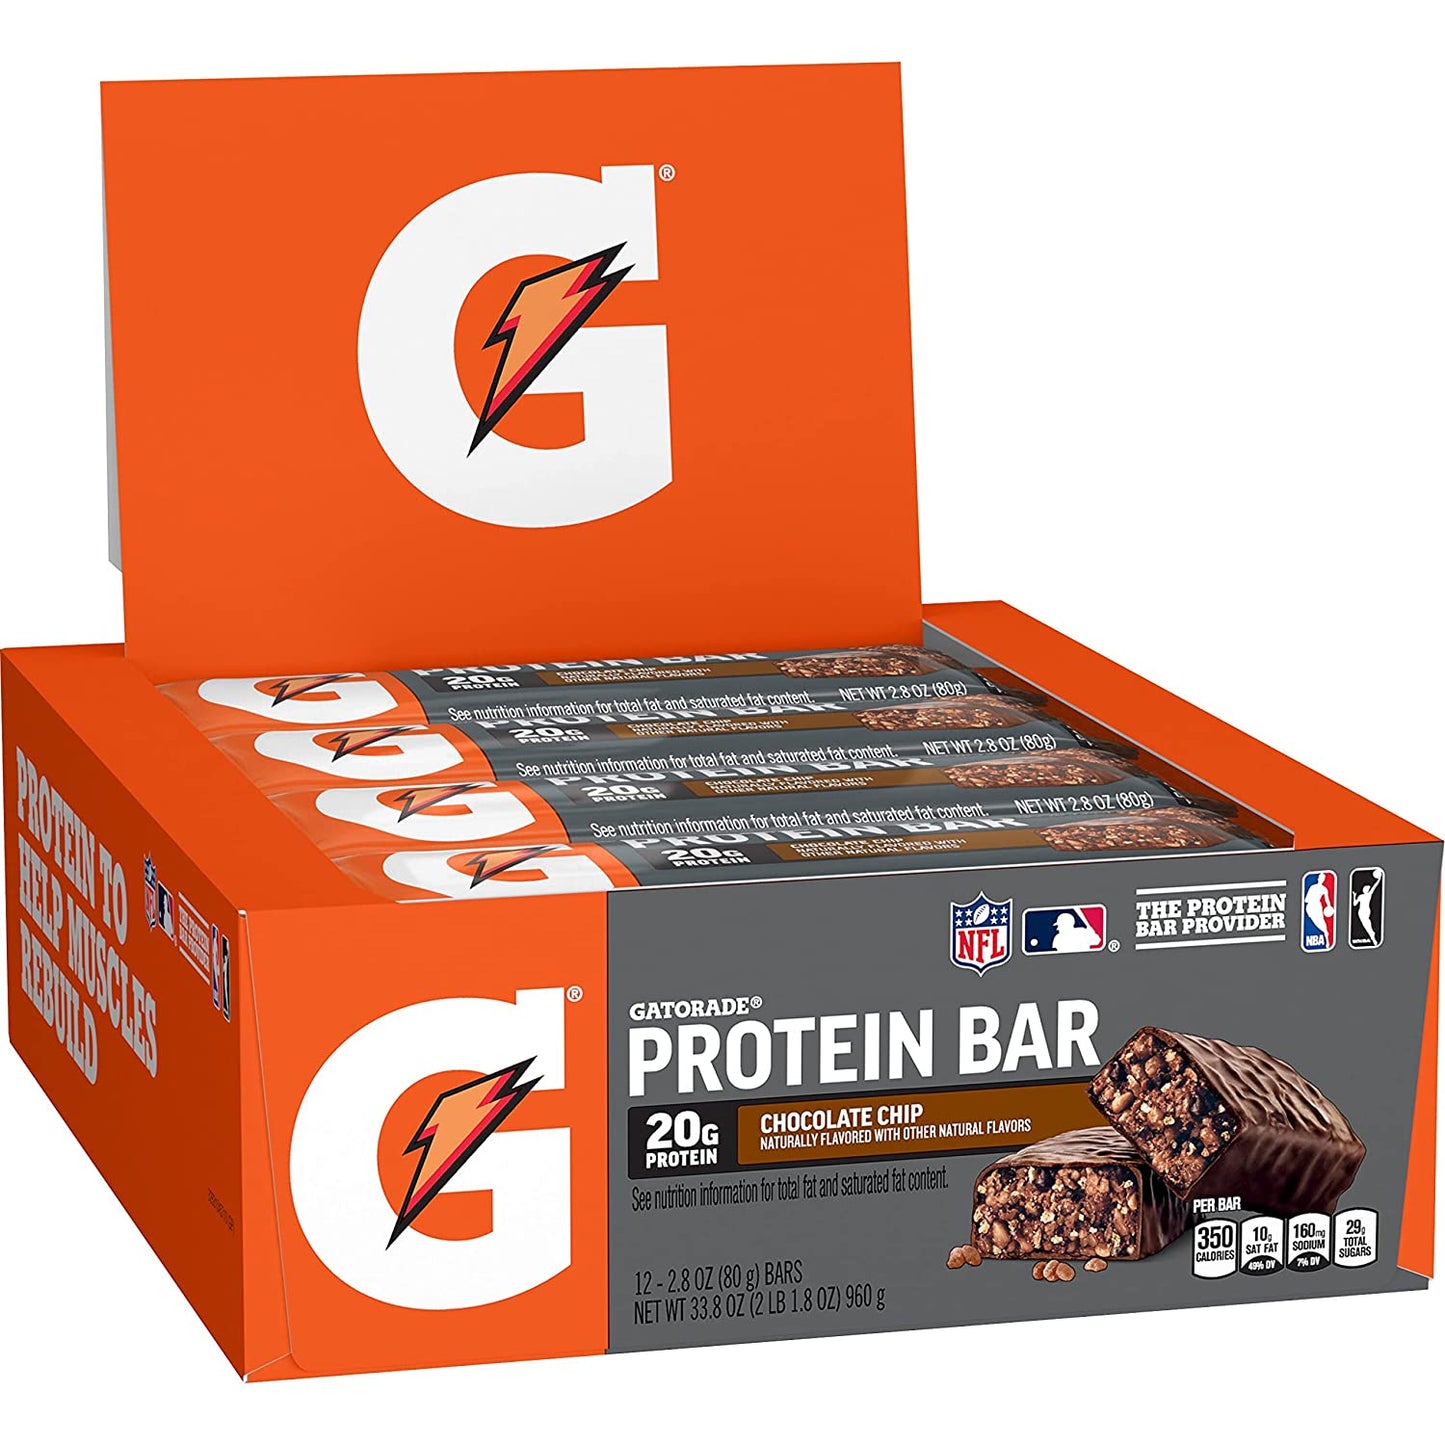 Gatorade Whey Protein Recover Bars, 2.8 ounce bars (Pack of 12) Wholesale